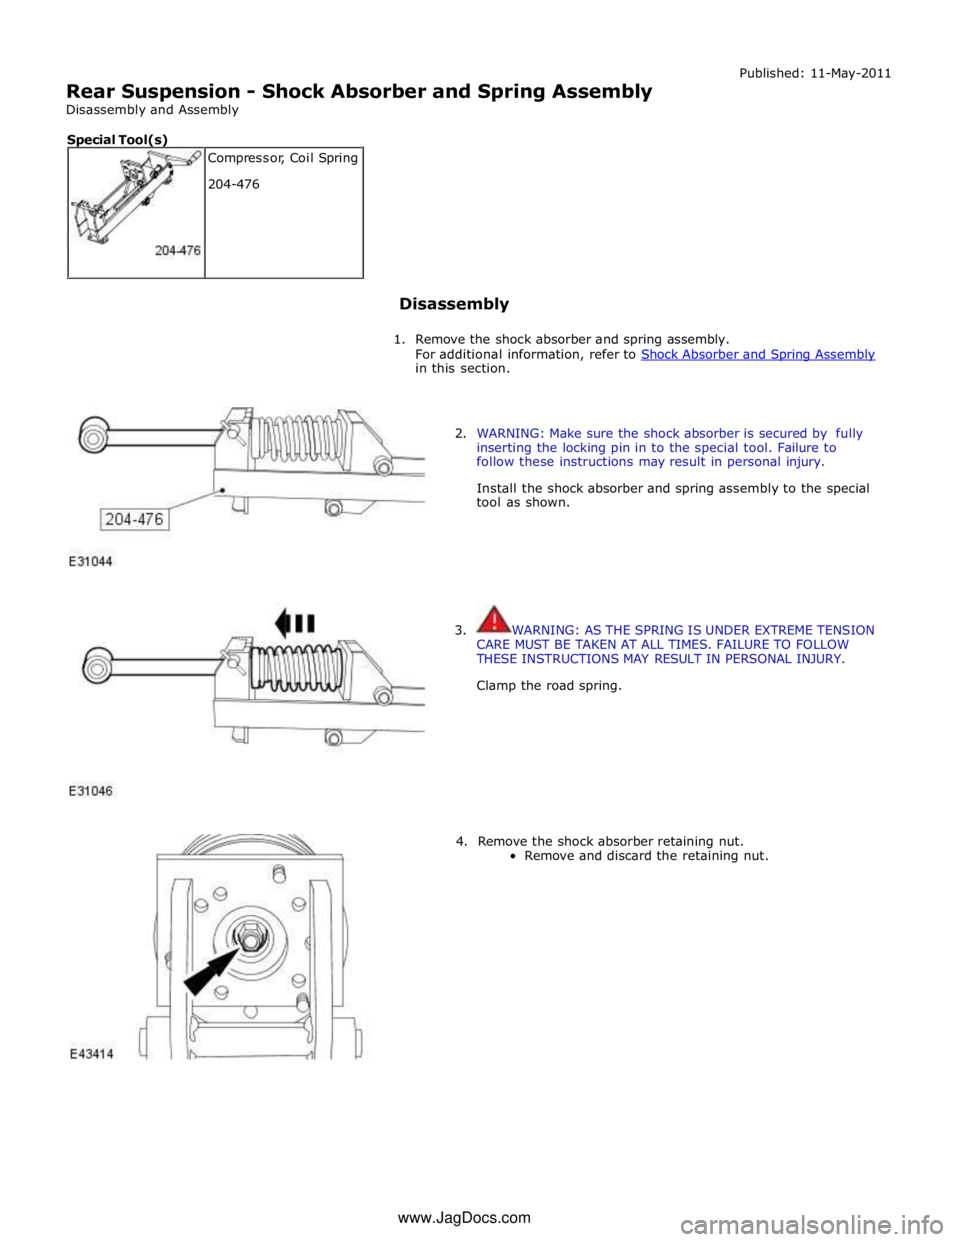 JAGUAR XFR 2010 1.G Service Manual  
Rear Suspension - Shock Absorber and Spring Assembly 
Disassembly and Assembly Published: 11-May-2011 
 
 
 
Disassembly 
 
1. Remove the shock absorber and spring assembly. 
For additional informat